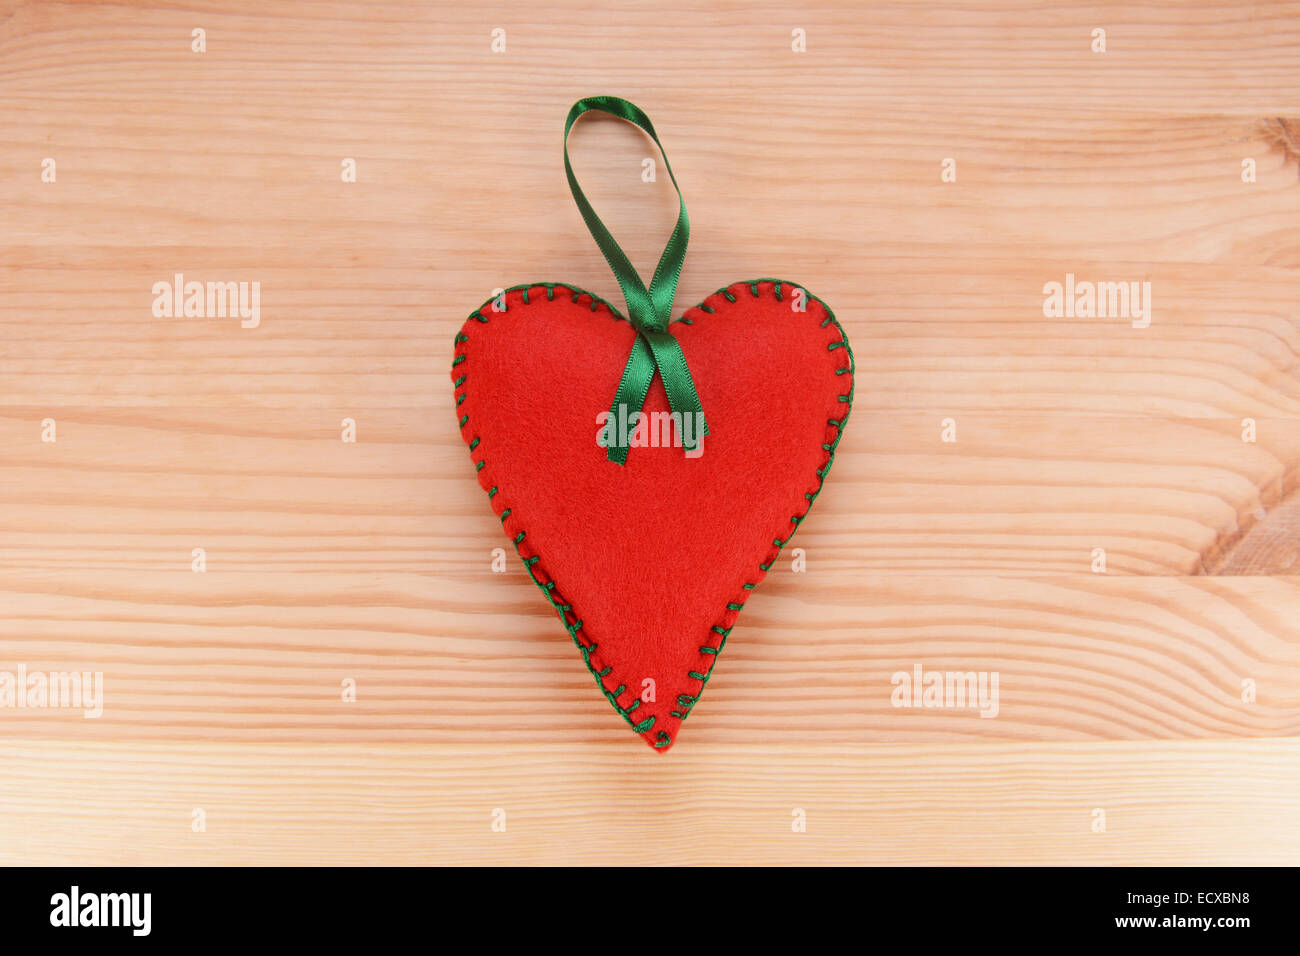 Red felt heart-shaped hanging decoration with green ribbon on a wooden table Stock Photo